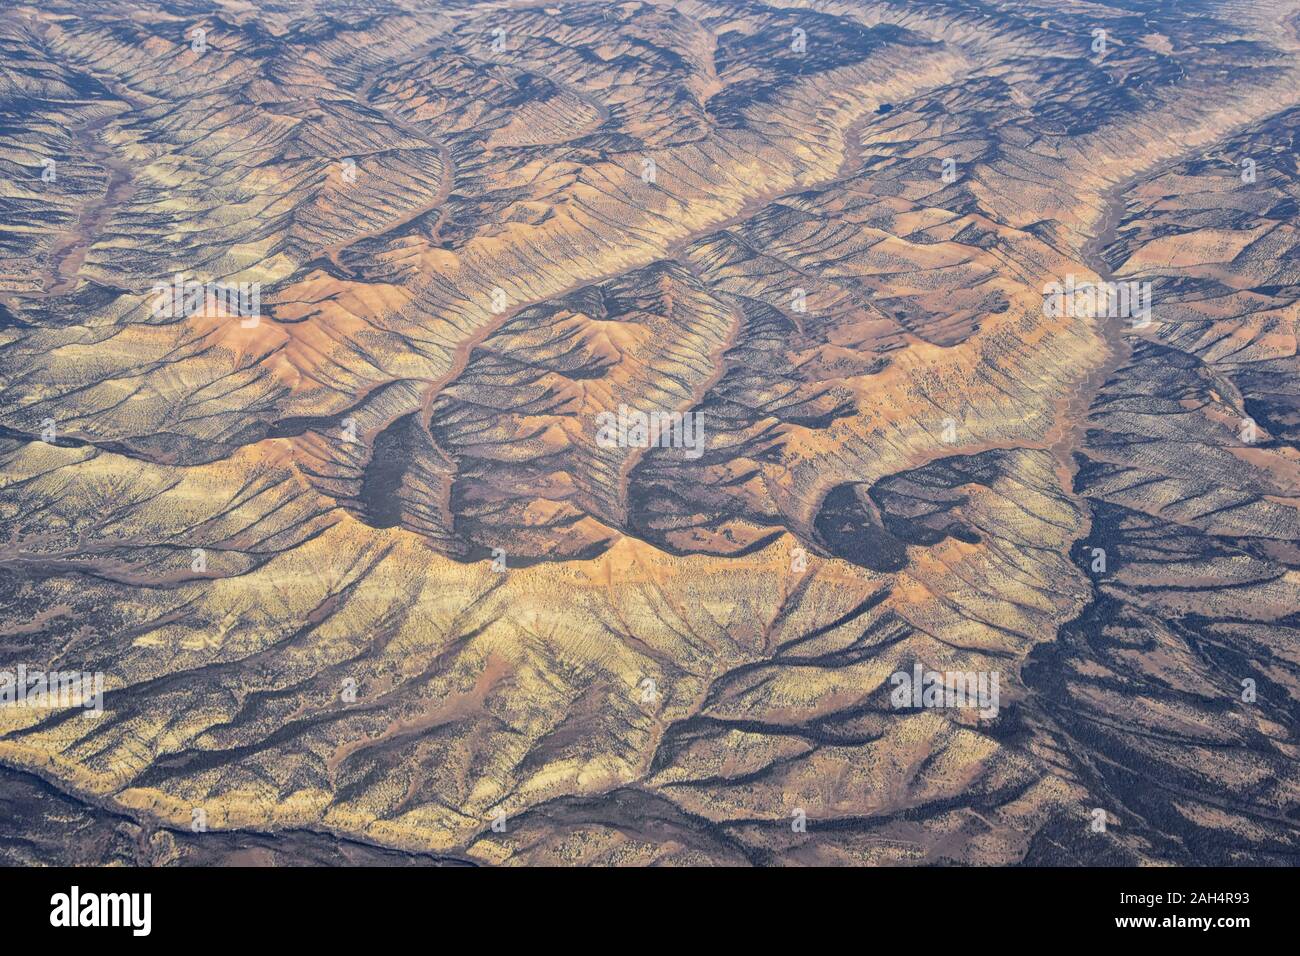 Colorado Rocky Mountains Aerial panoramic views from airplane of abstract Landscapes, peaks, canyons and rural cities in southwest Colorado and Utah. Stock Photo